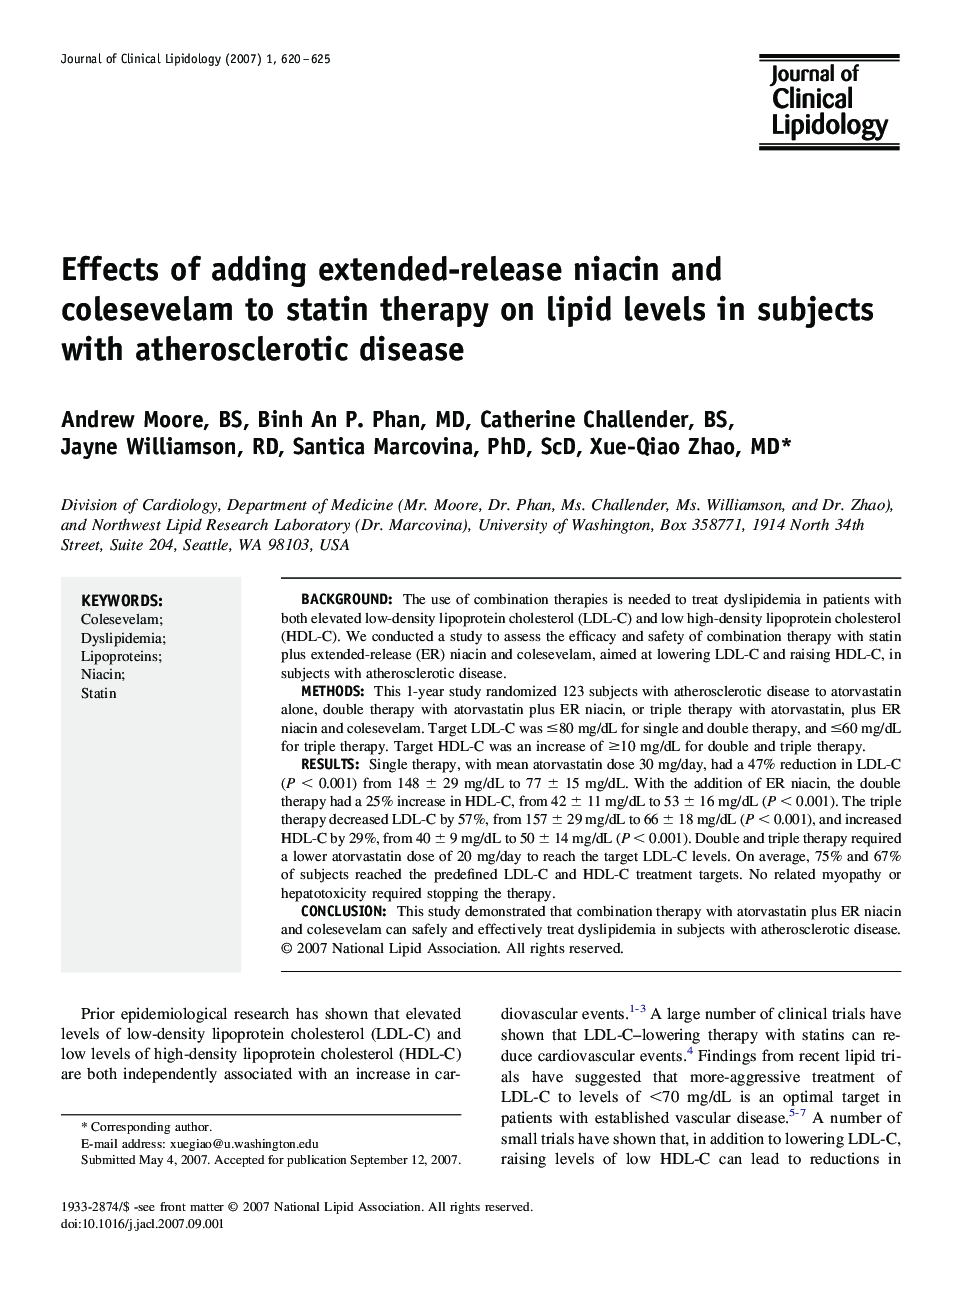 Effects of adding extended-release niacin and colesevelam to statin therapy on lipid levels in subjects with atherosclerotic disease